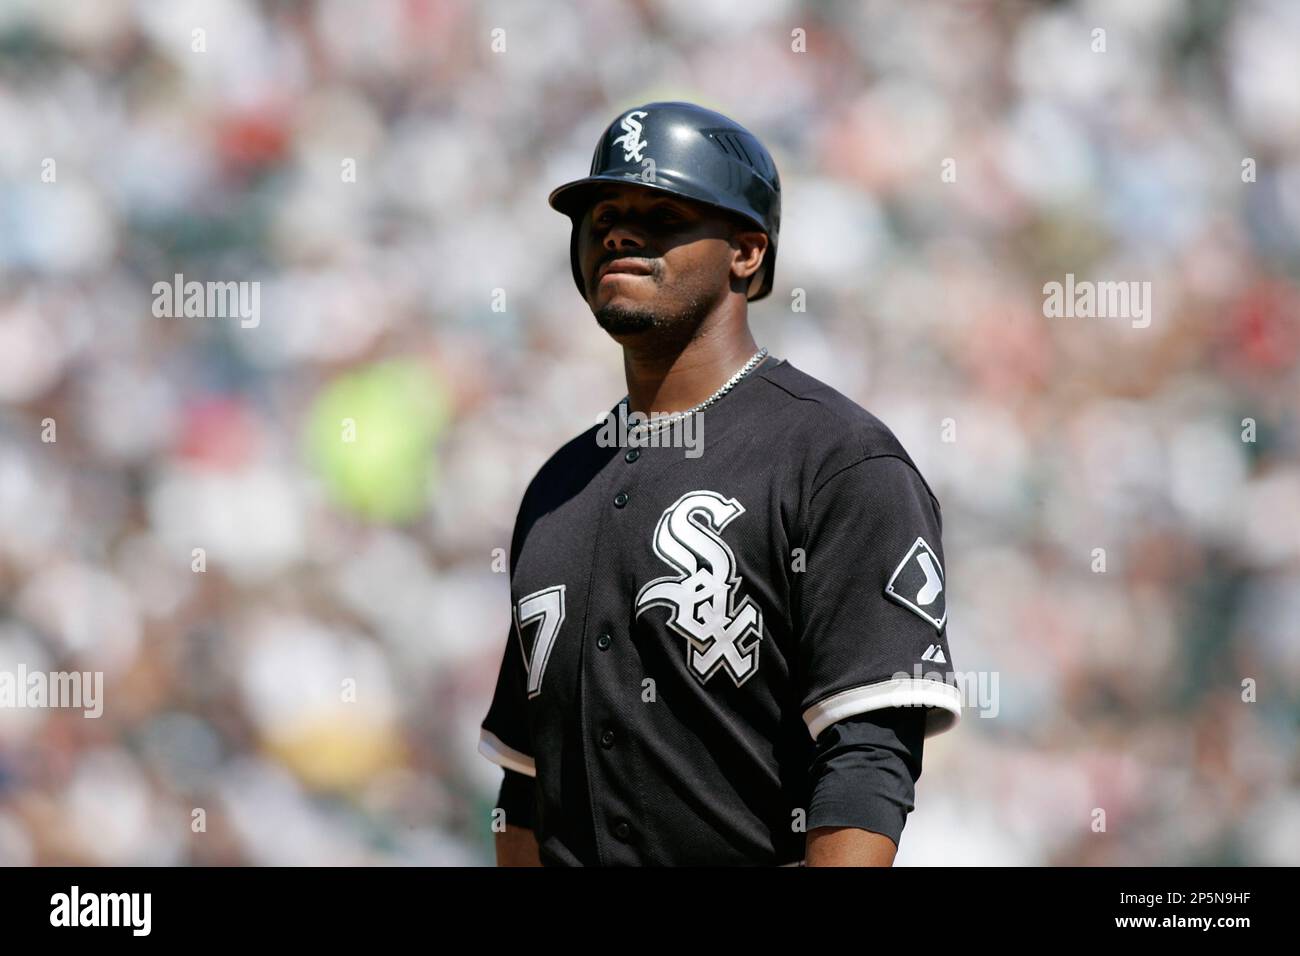 CHICAGO, IL - AUGUST 14: Outfielder Ken Griffey Jr. #17 of the Chicago White  Sox follows through on his swing after hitting the baseball against the  Kansas City Royals at the U.S.